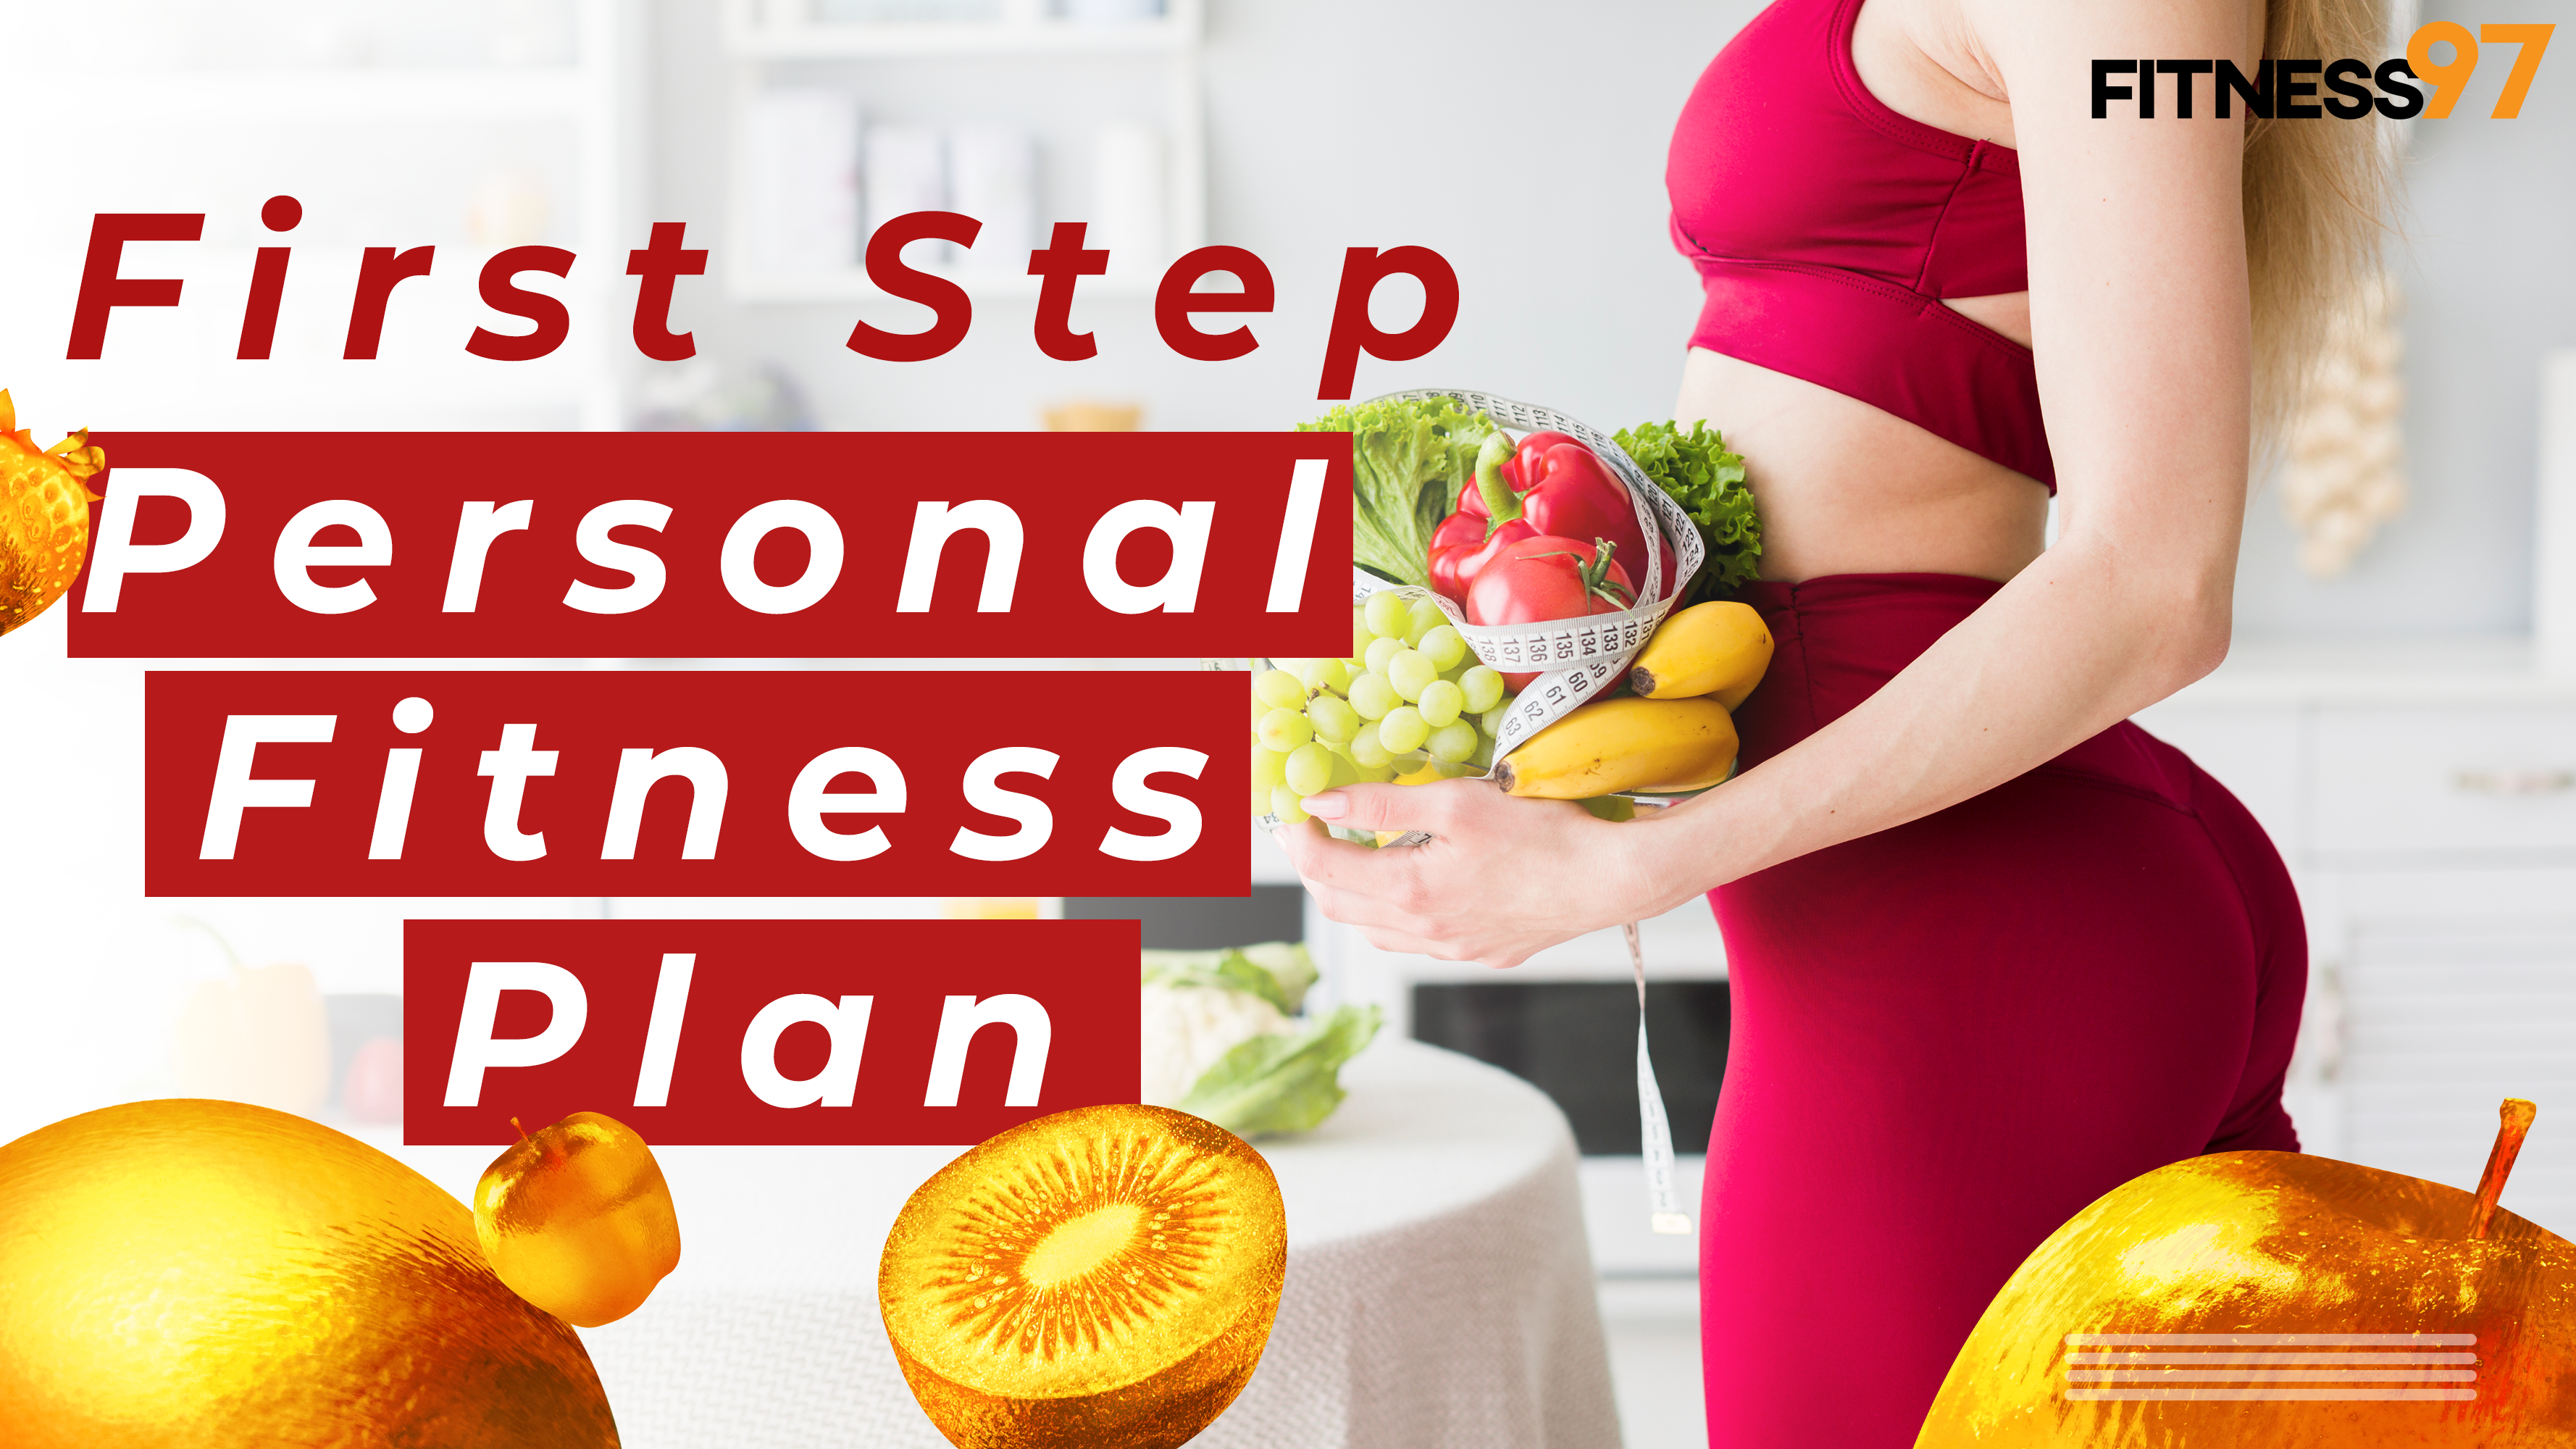 What Is The First Step In Developing The Personal Fitness Plan